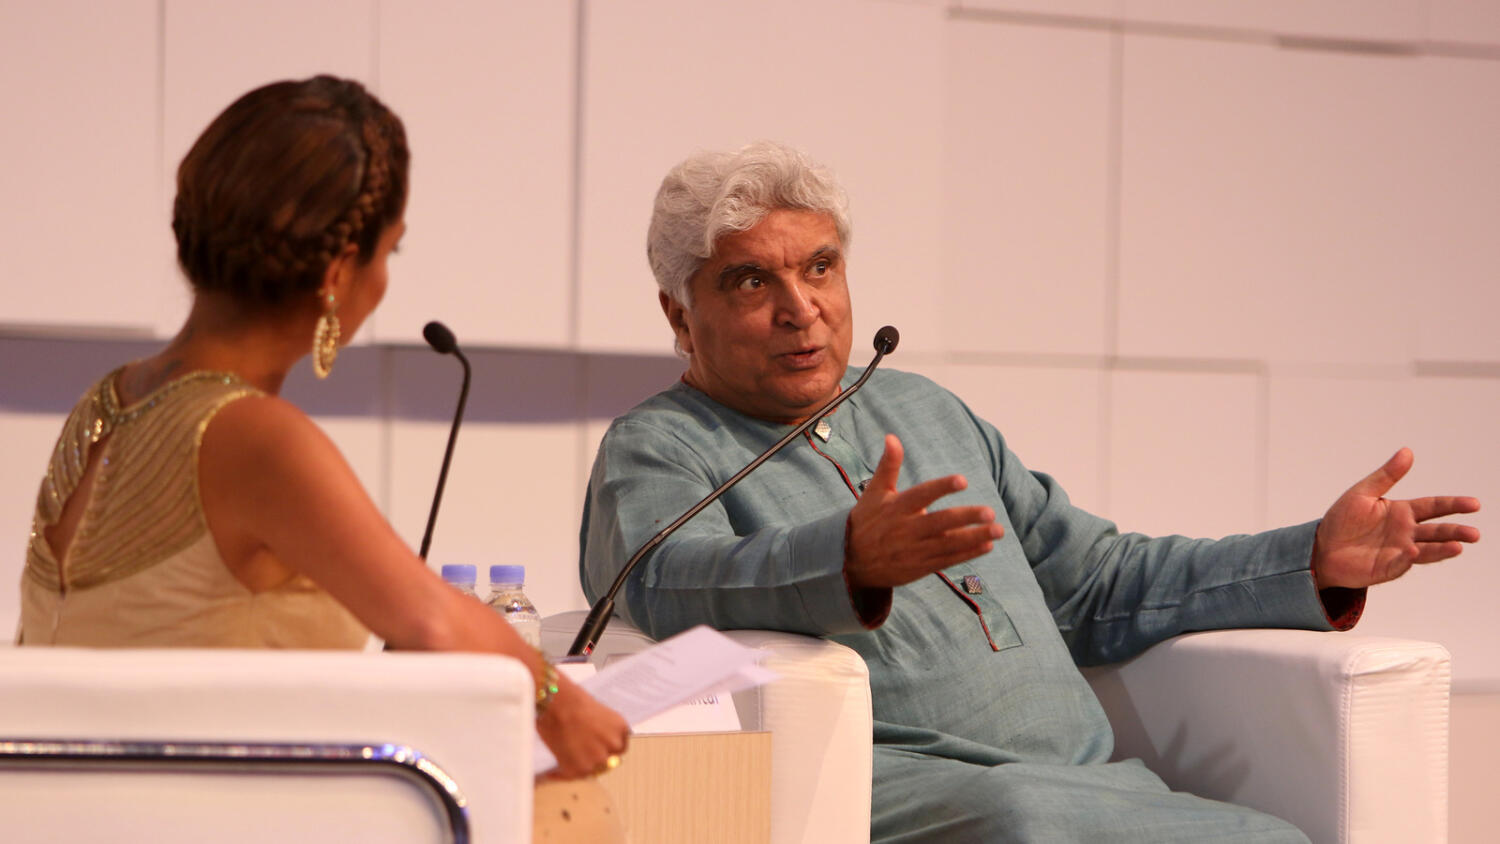 There’s no school to learn poetry, but all the great poets can be the school for aspiring poets, Javed Akhtar told the audience at the Sharjah International Book Fair. — Photo by M. Sajjad